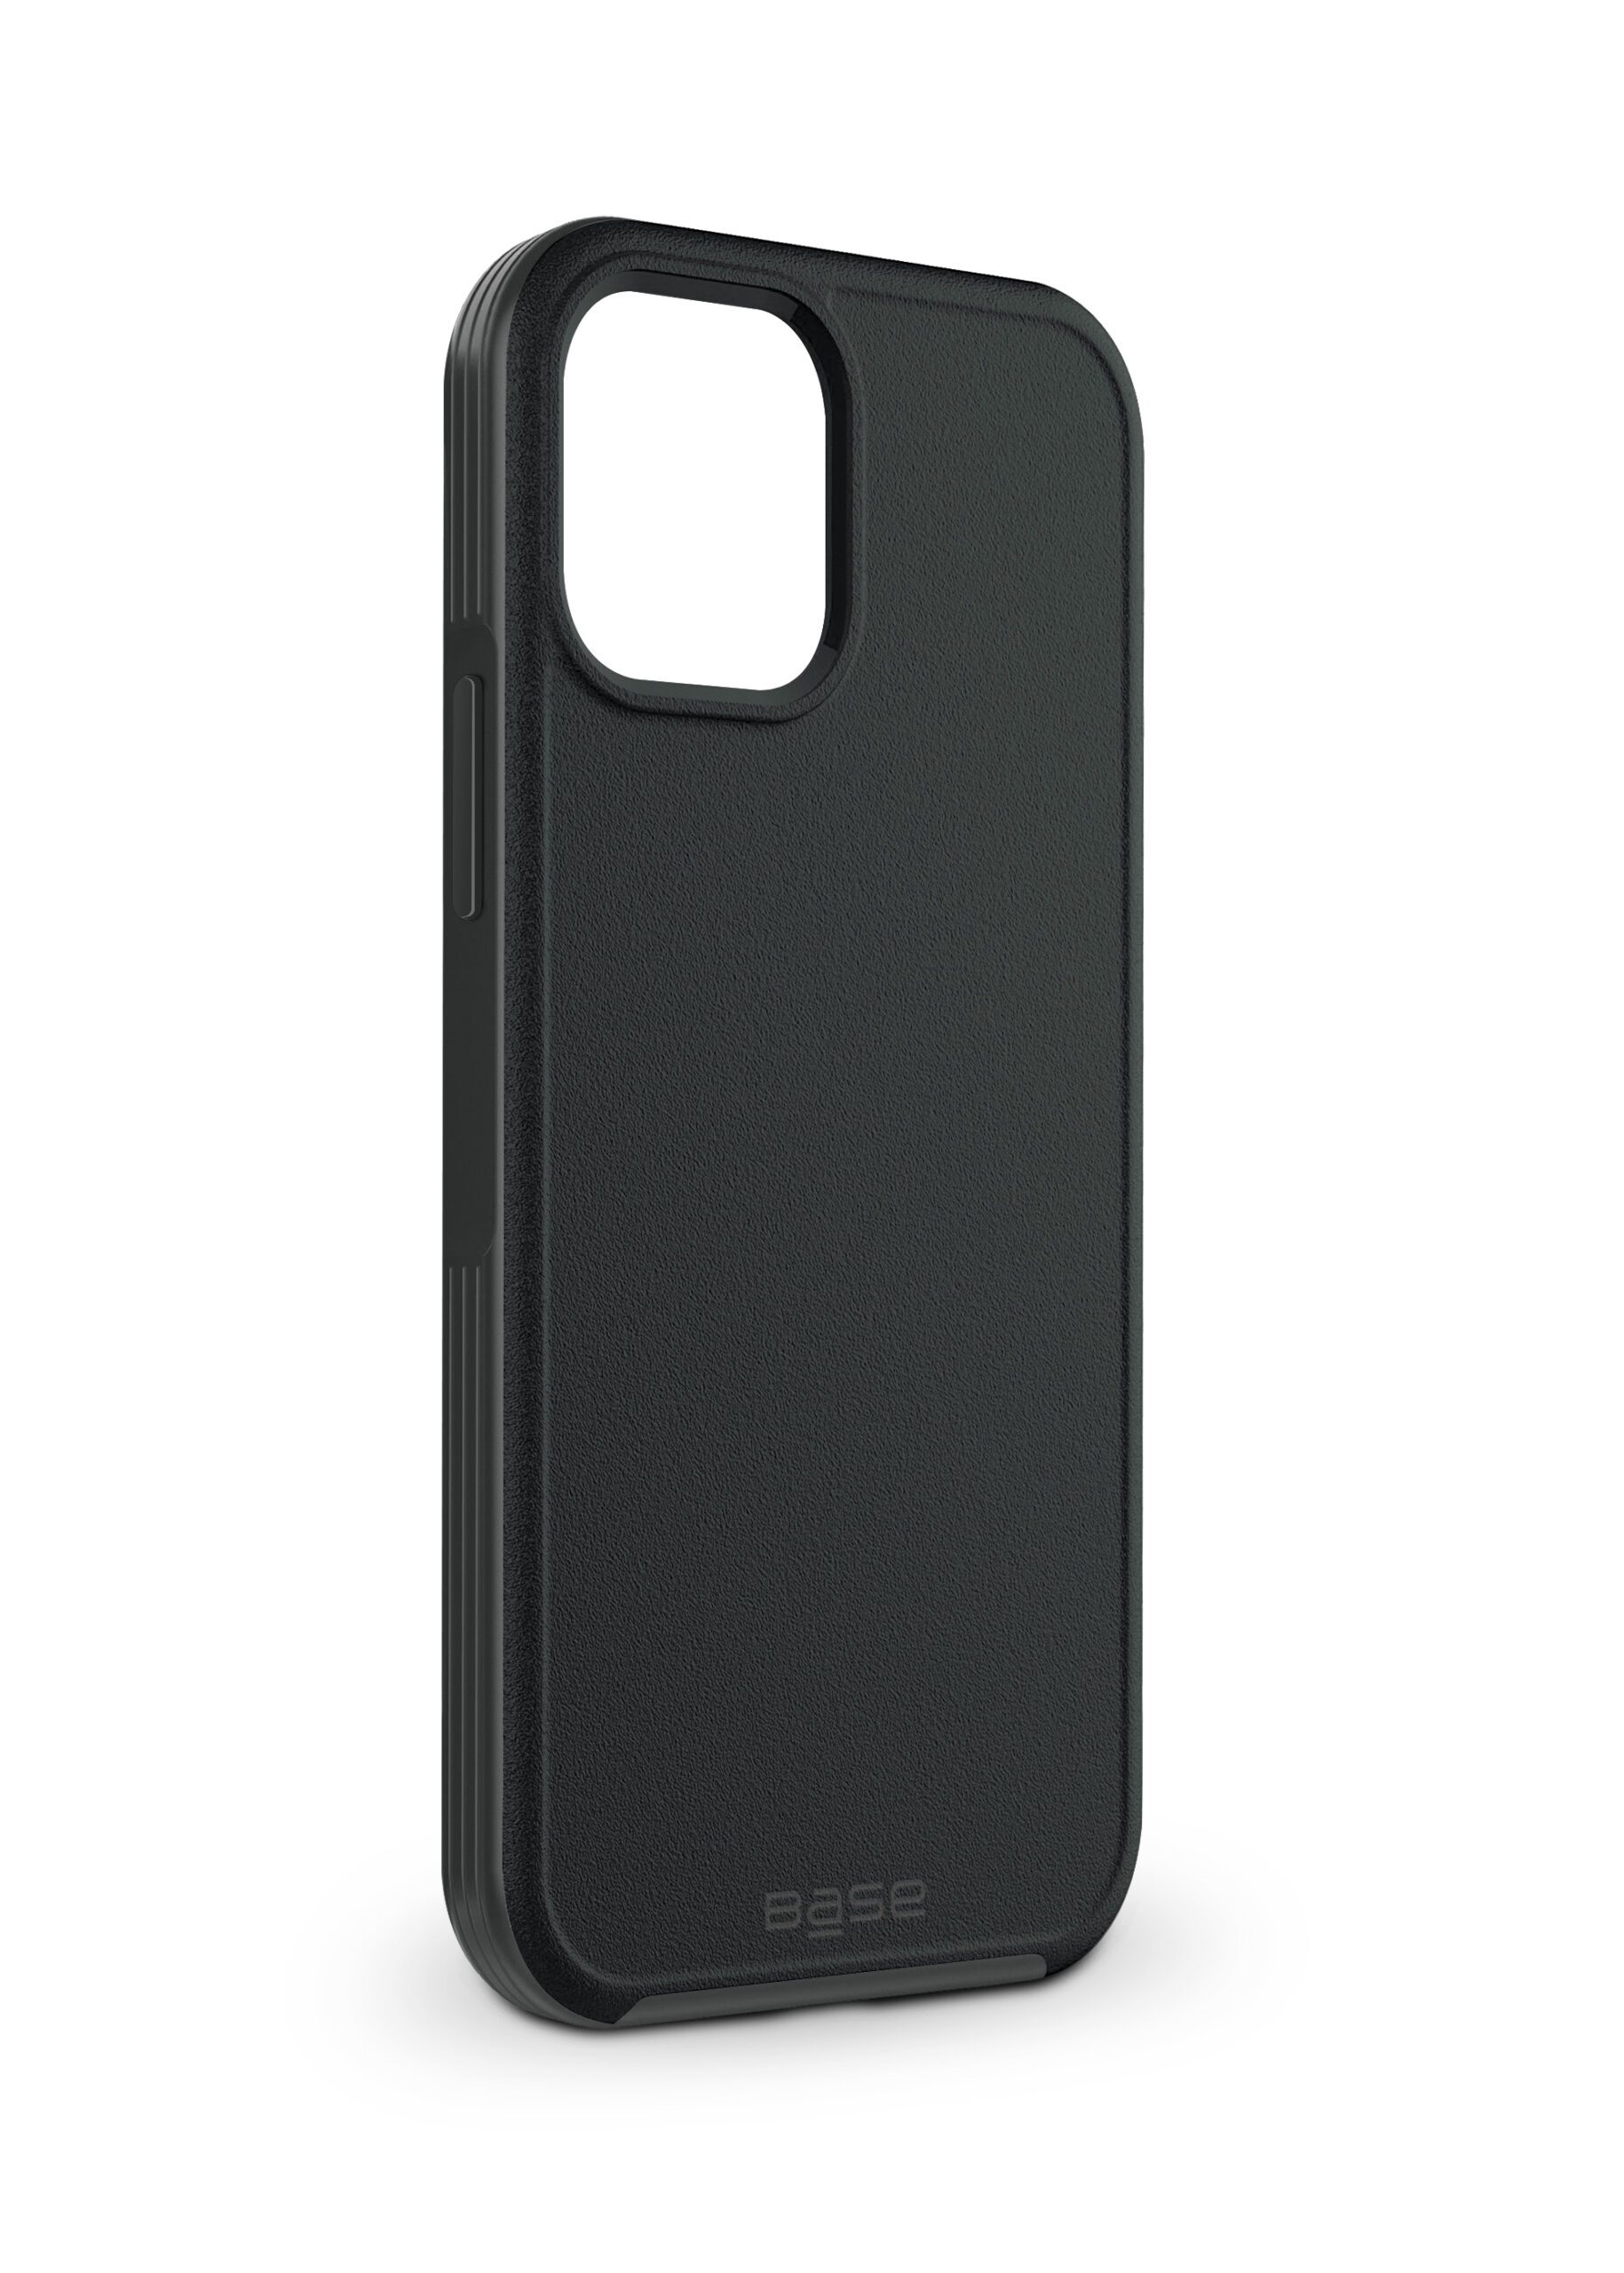 Base ProTech Rugged Armor Case for iPhone 13 Mini